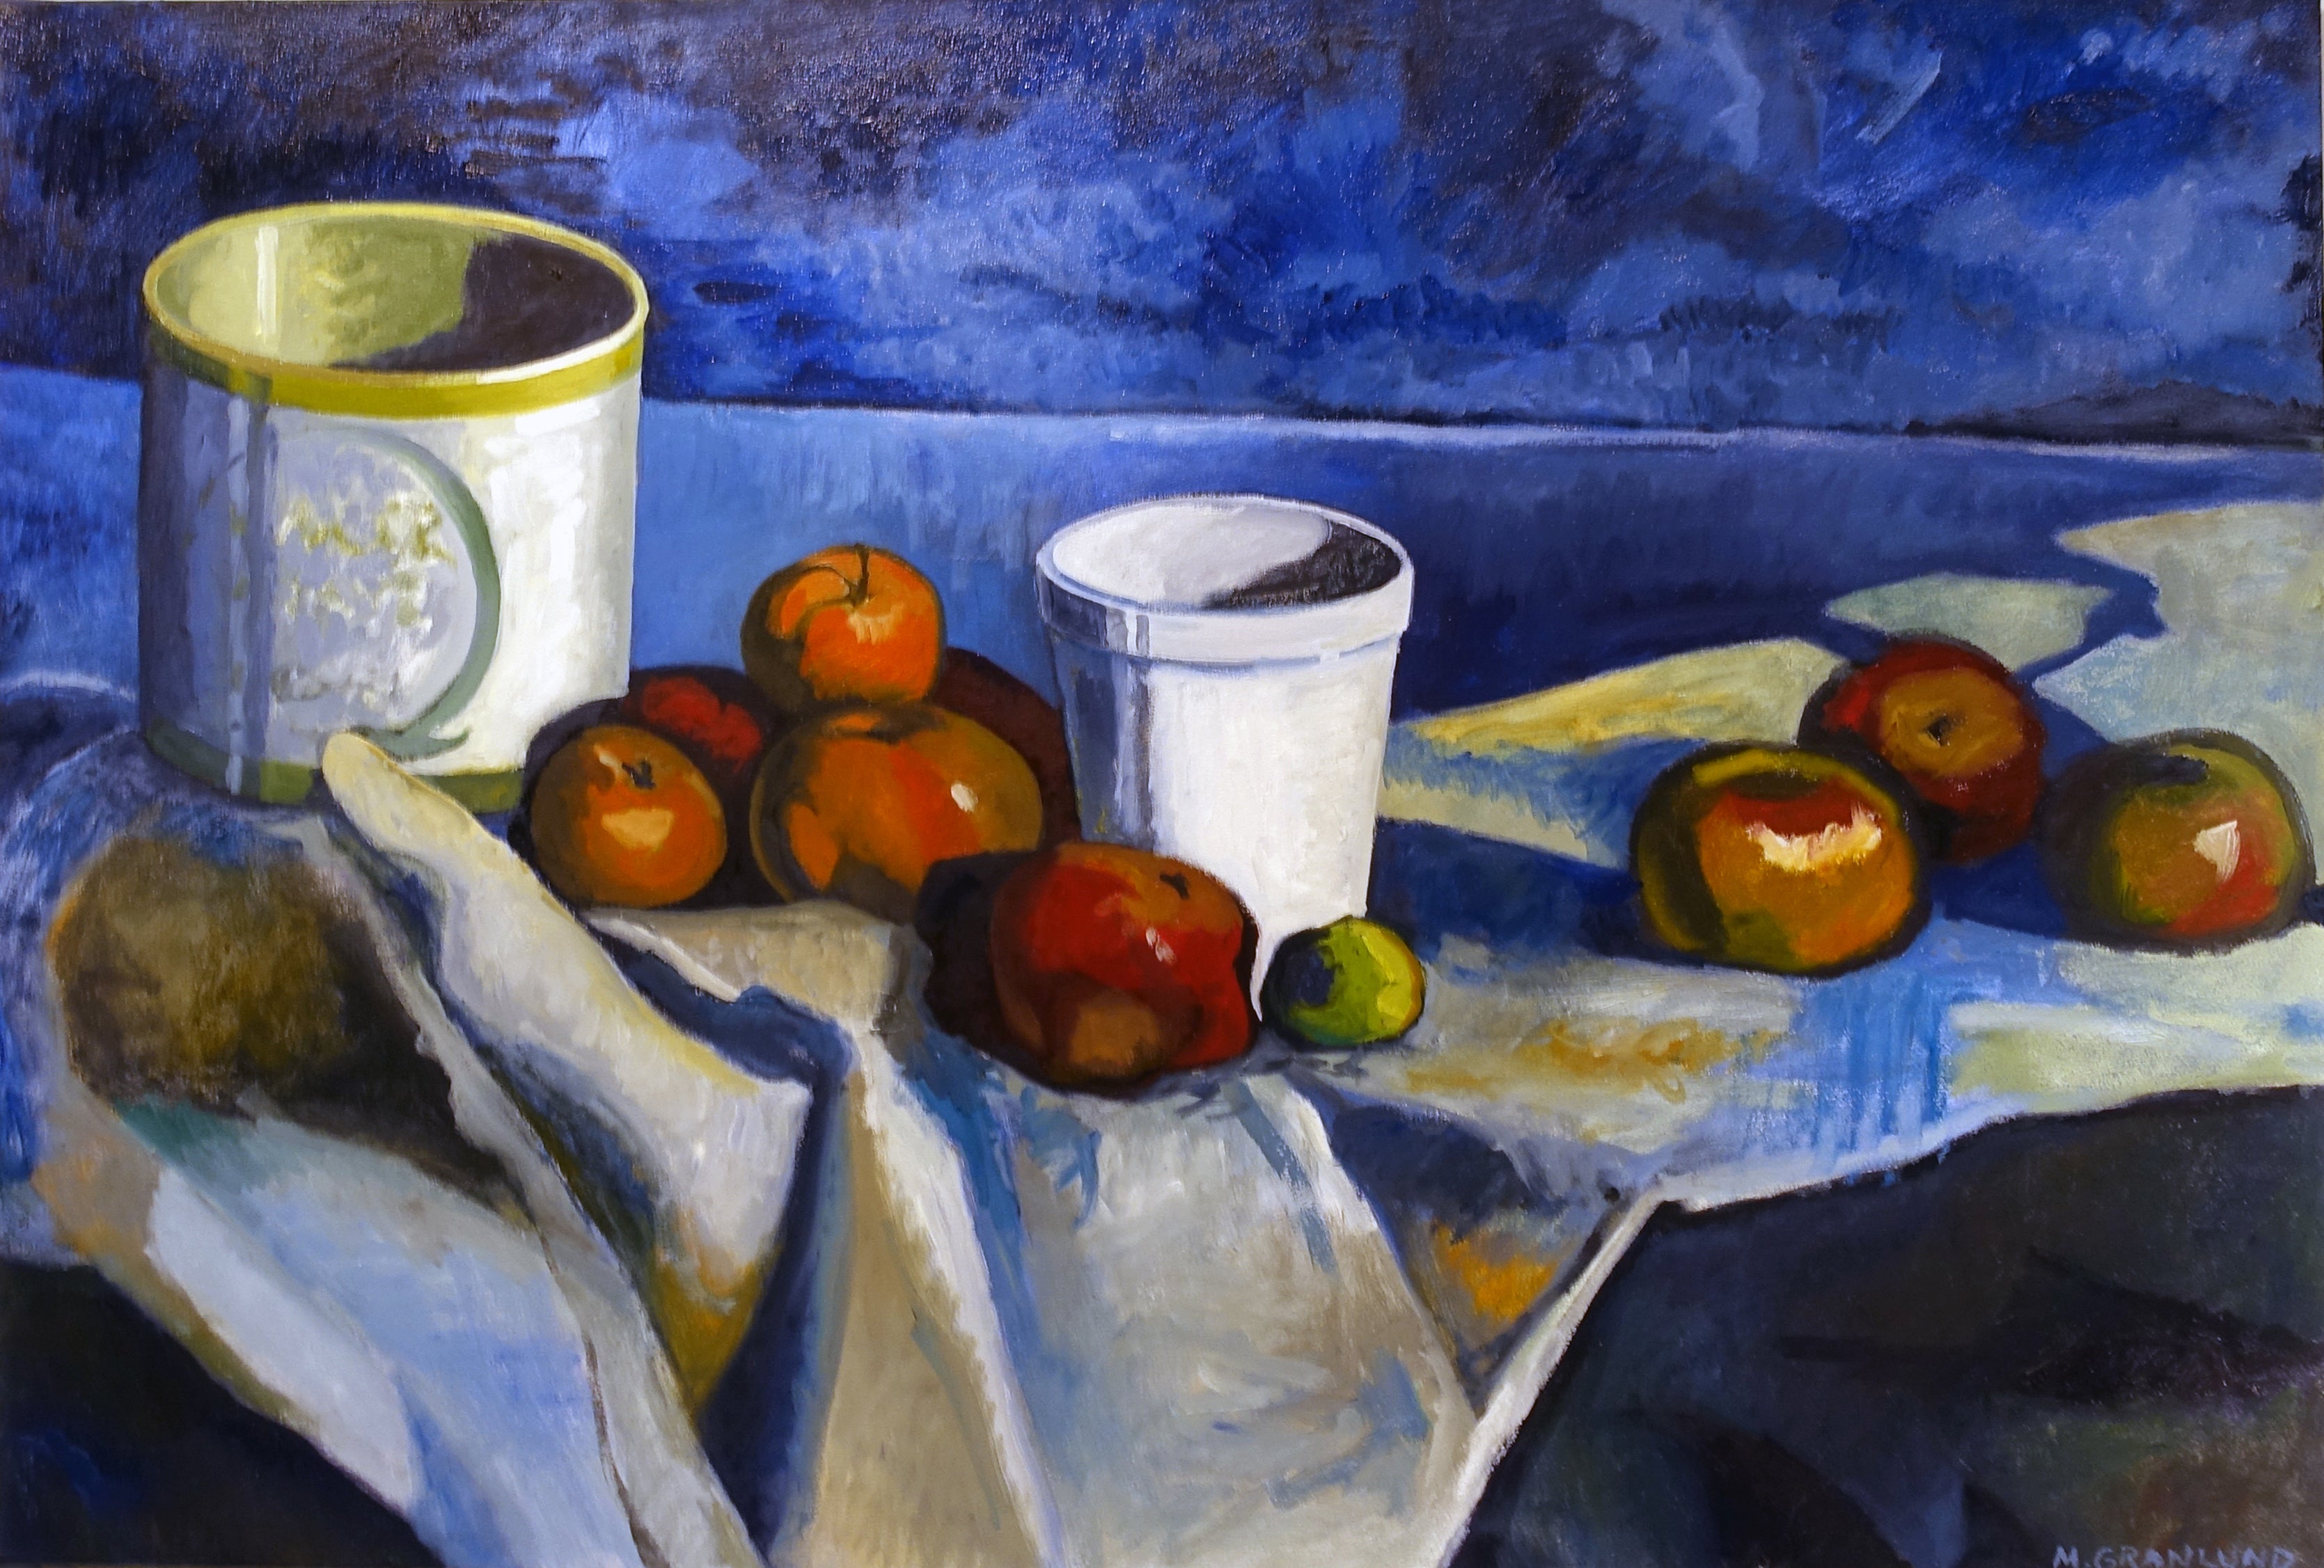 'STILL LIFE WITH ARCTIC APPLES, STYROFOAM CUP AND OIL CAN' - Oil Paint on Canvas